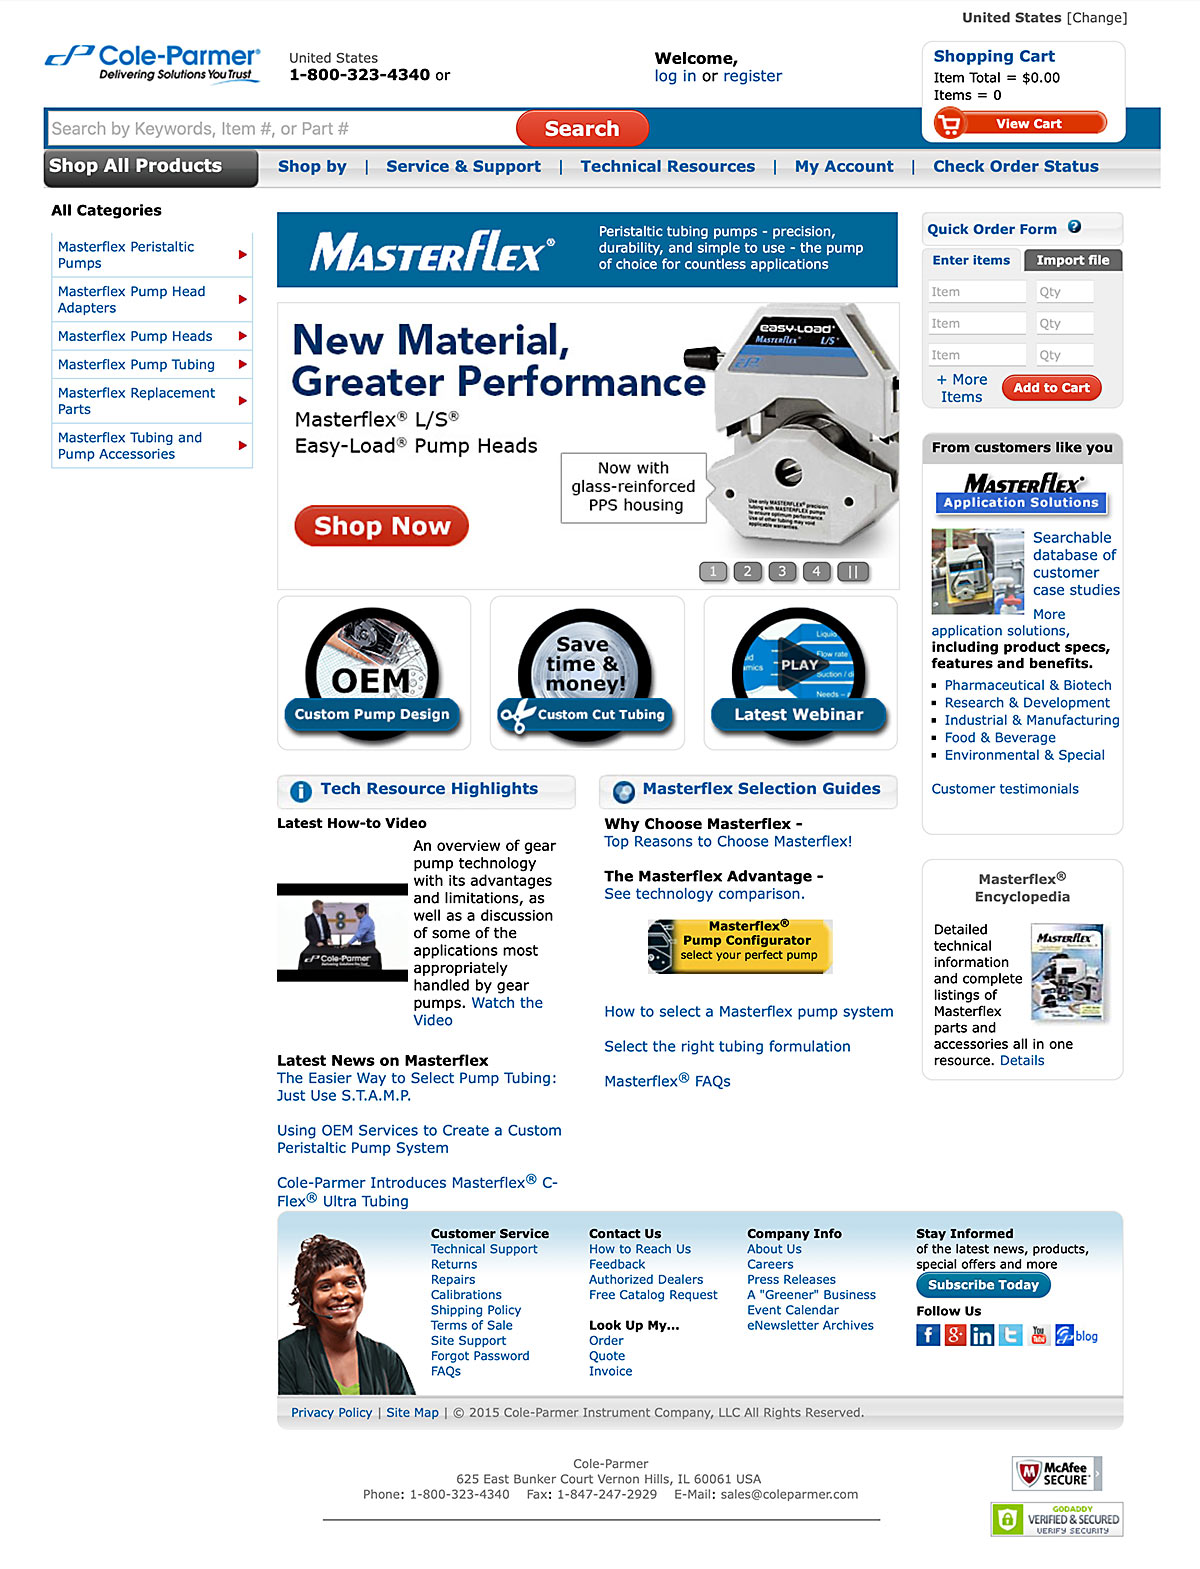 The Masterflex homepage appearance when I joined the team.